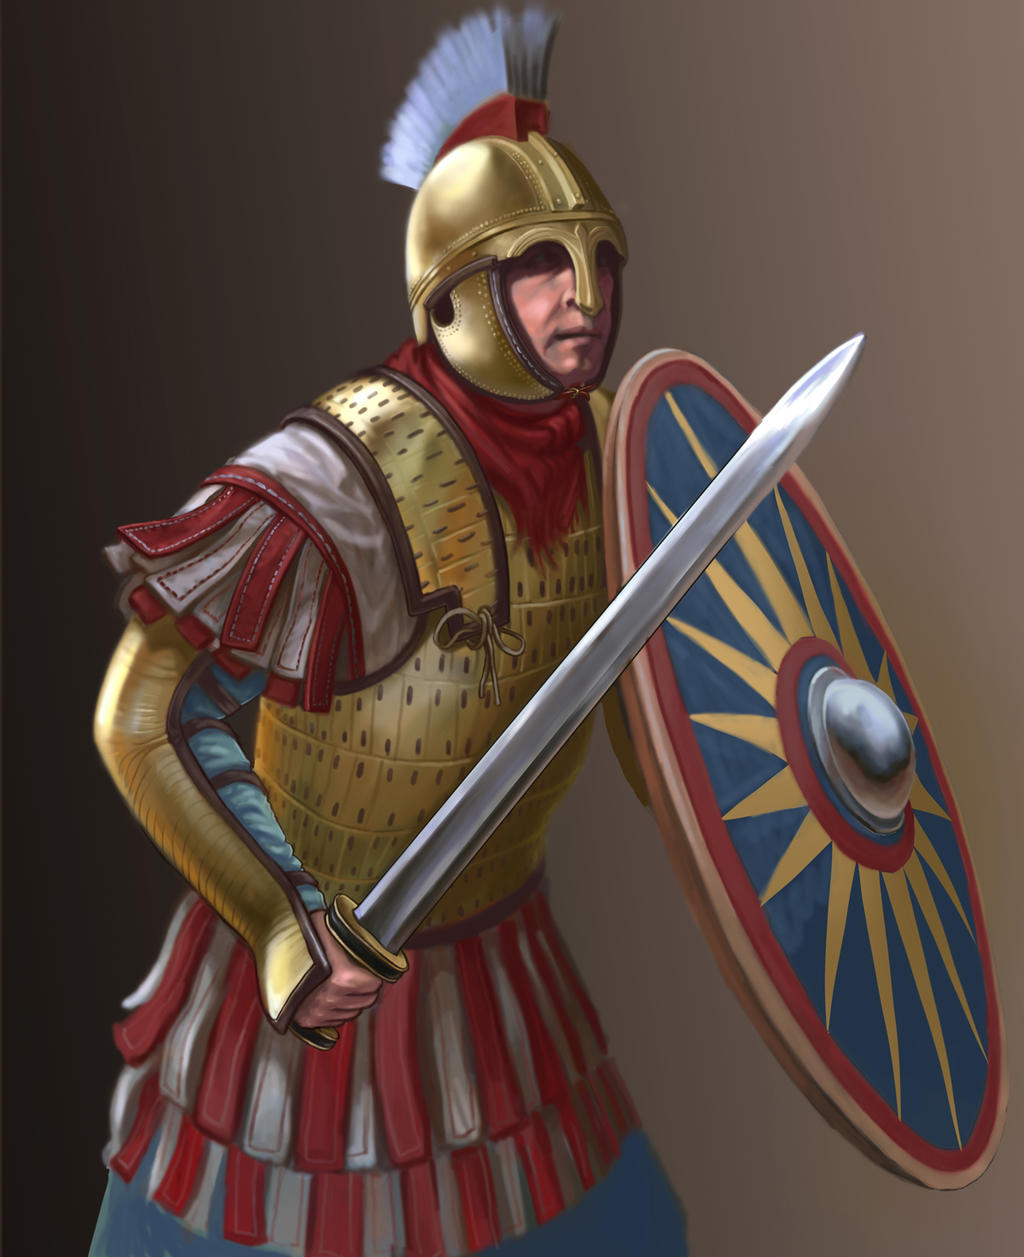 v_century_roman_warrior_by_simulyaton_d8kloaf-fullview